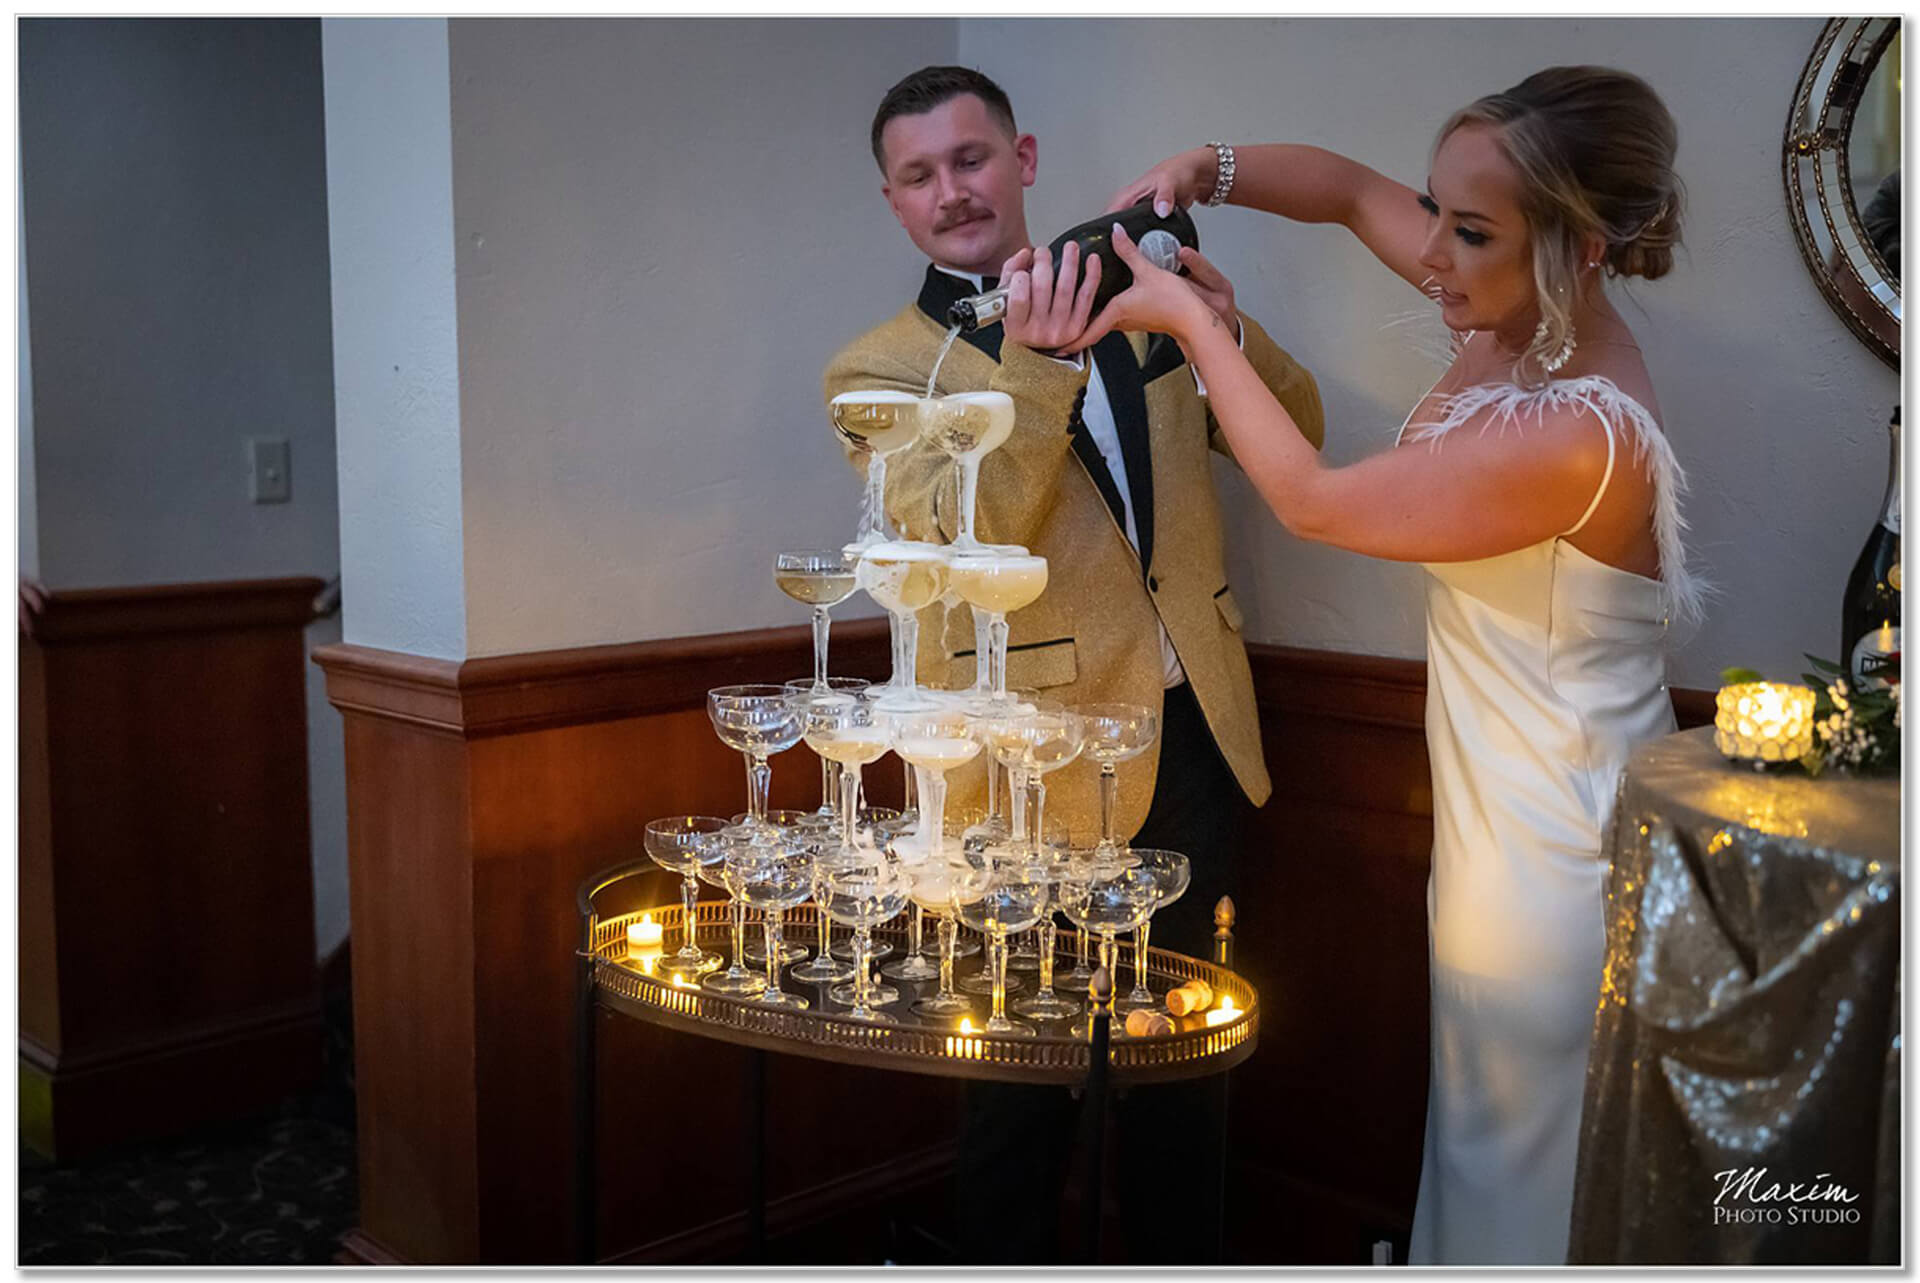 The Windamere wedding reception champagne fountain